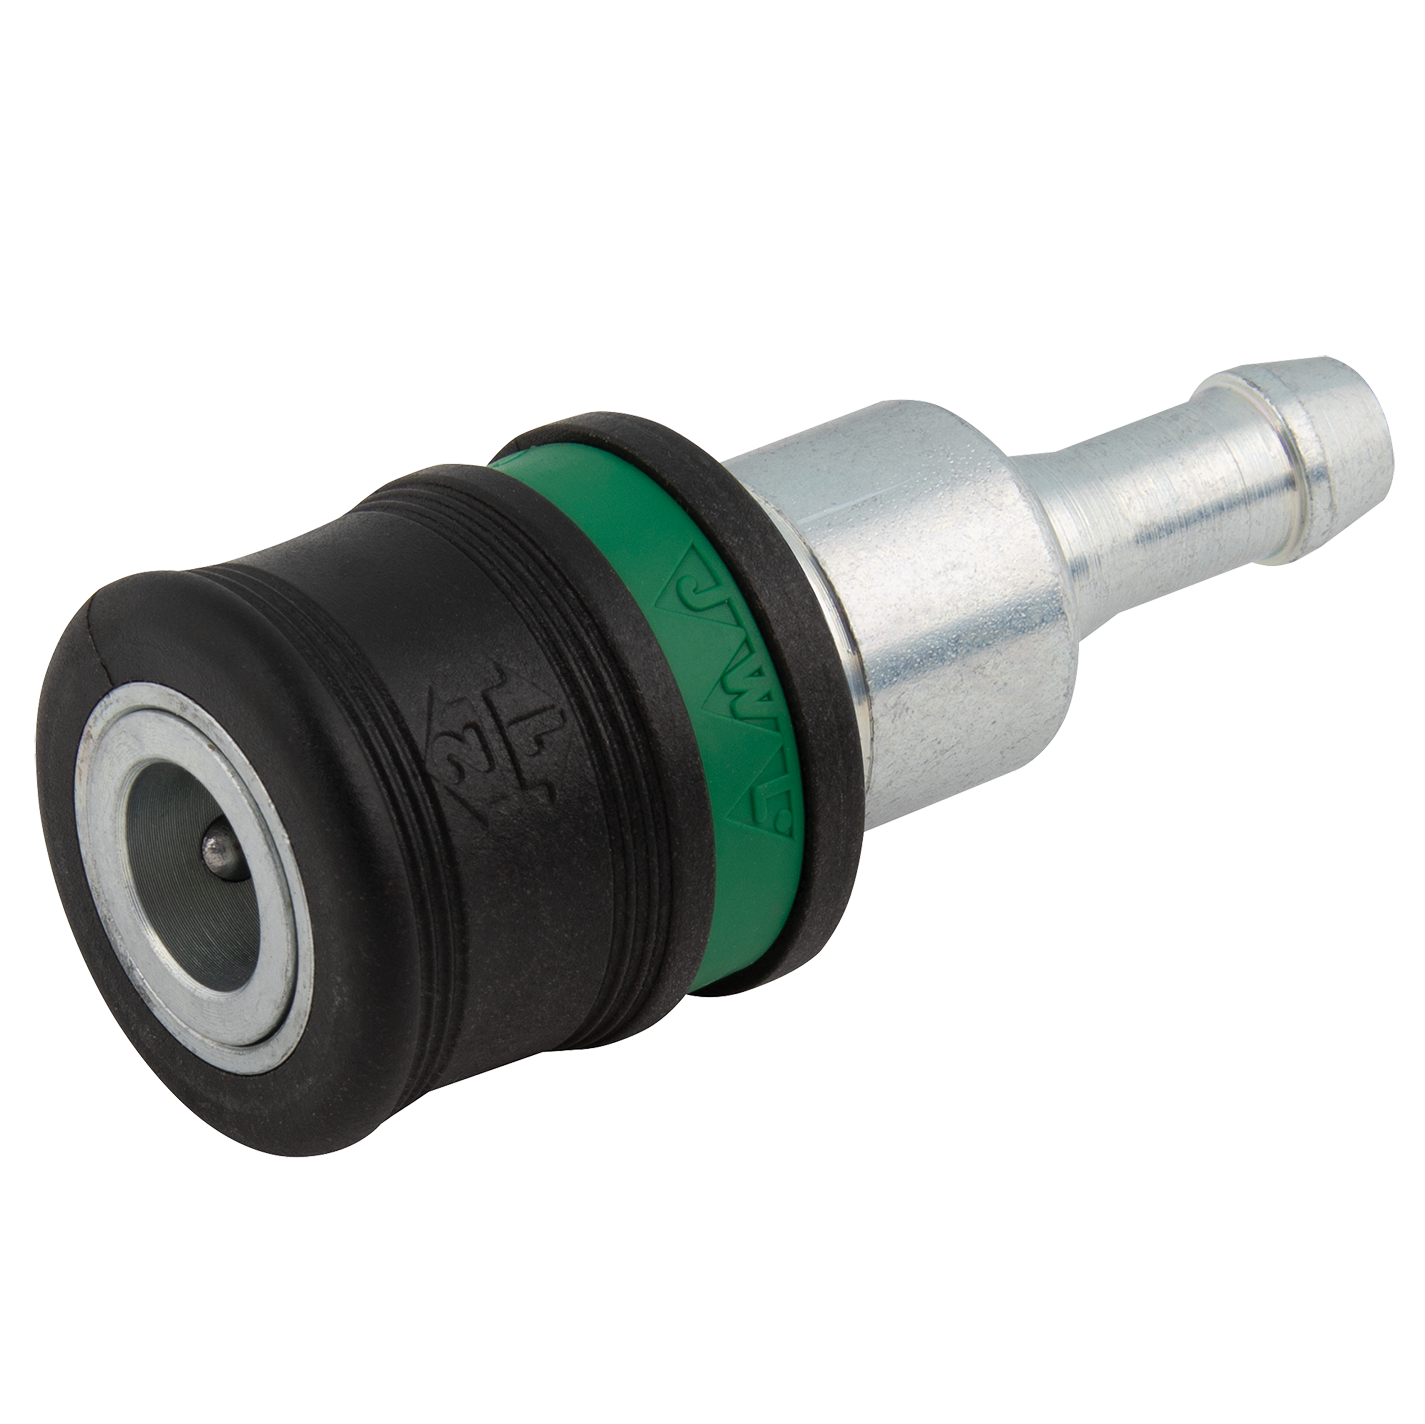 13MM HOSE TAIL EURO 570 SAFETY COUPLING